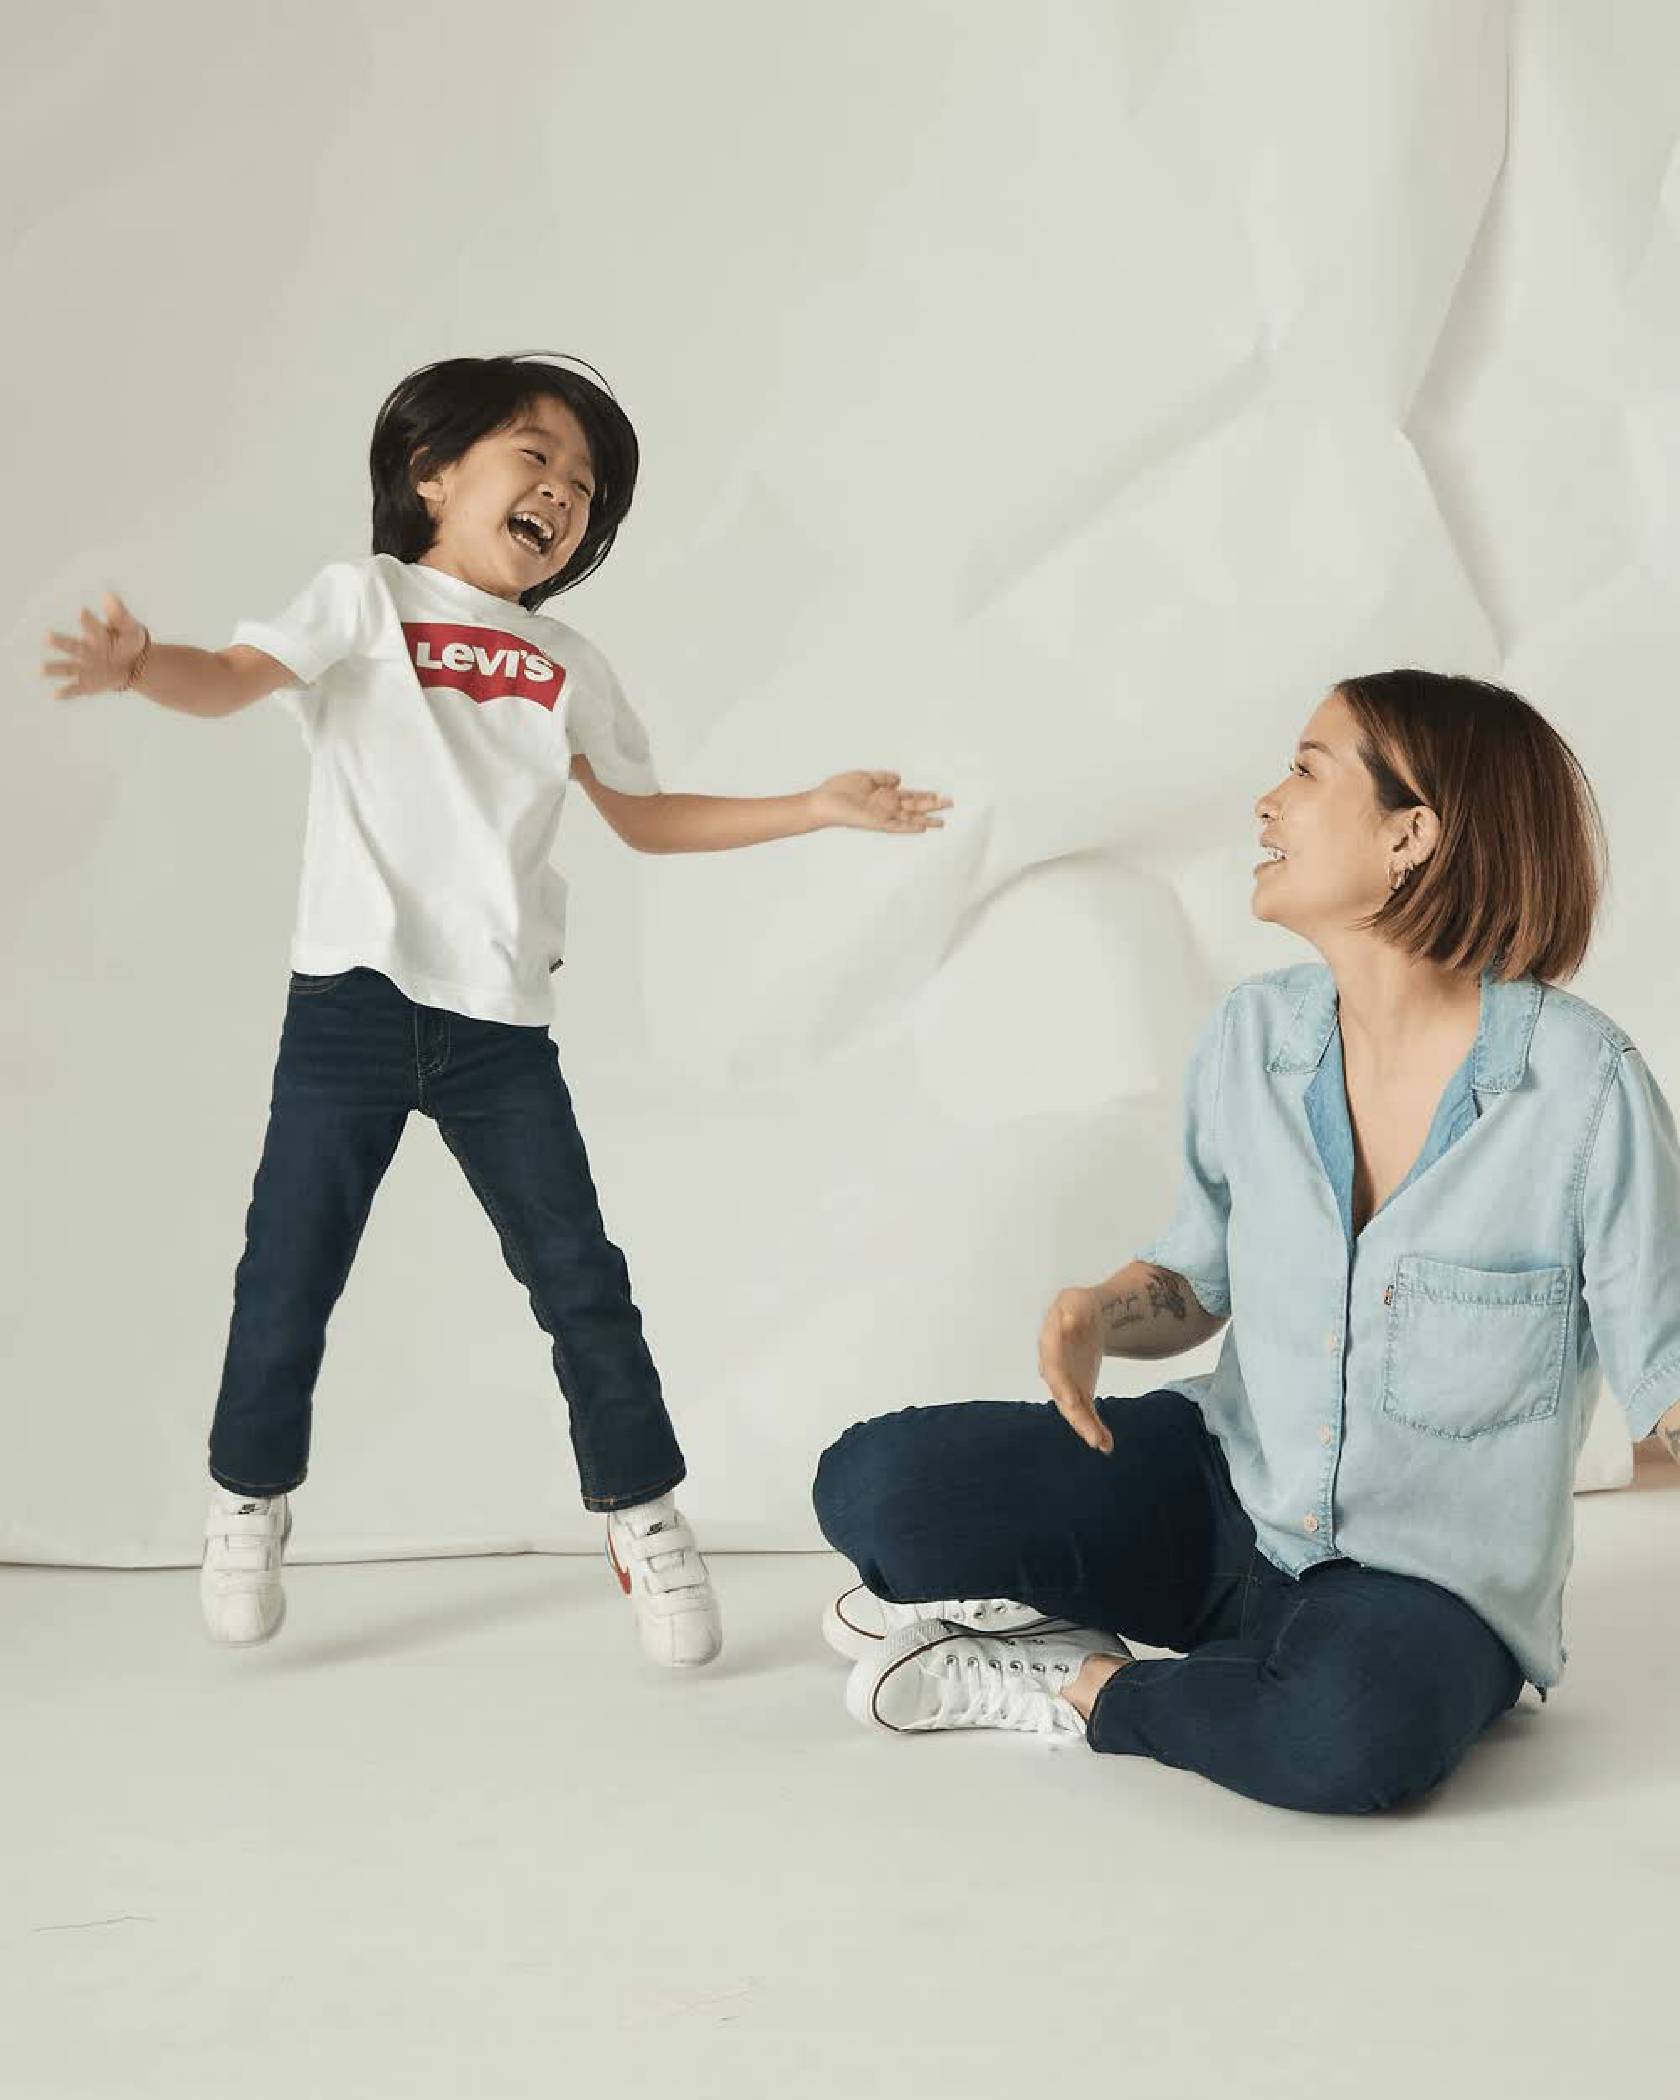 Gif animation of mother and child in studio